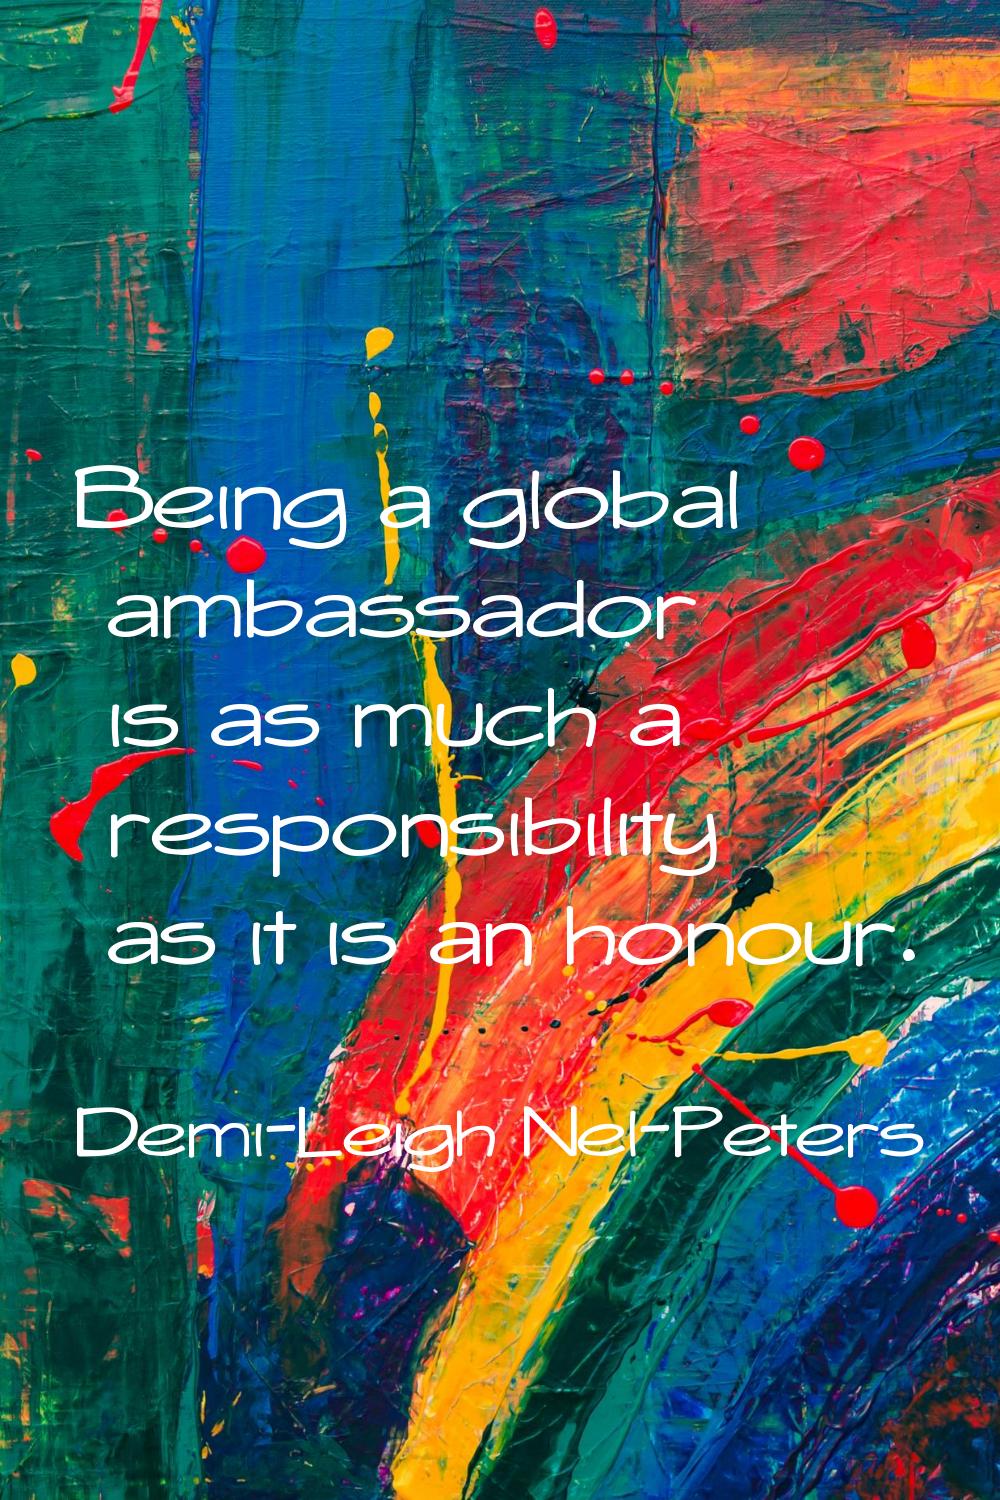 Being a global ambassador is as much a responsibility as it is an honour.